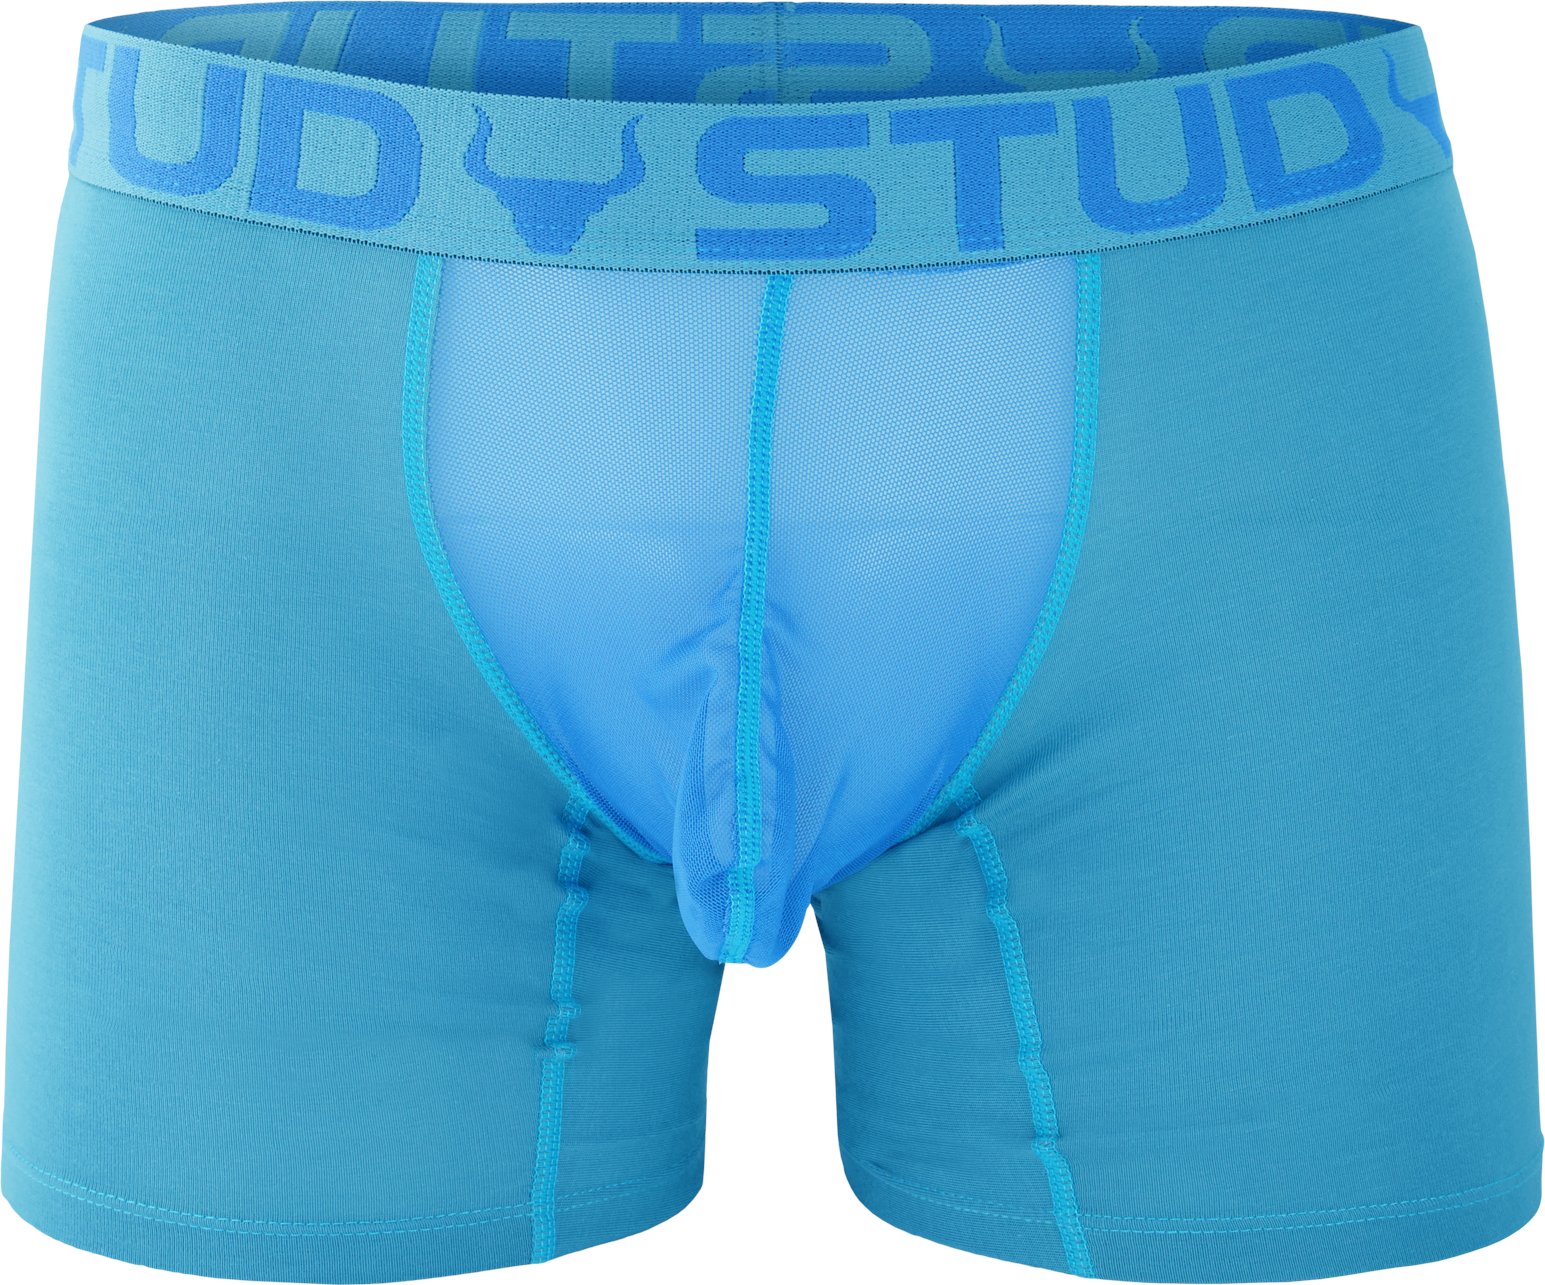 Hyperstarter on X: Normal underwear traps toxic amounts of heat and  prevents normal testicular cooling. Stud Briefs are science backed cooling  underwear designed to improve varicocele, fertility and testosterone